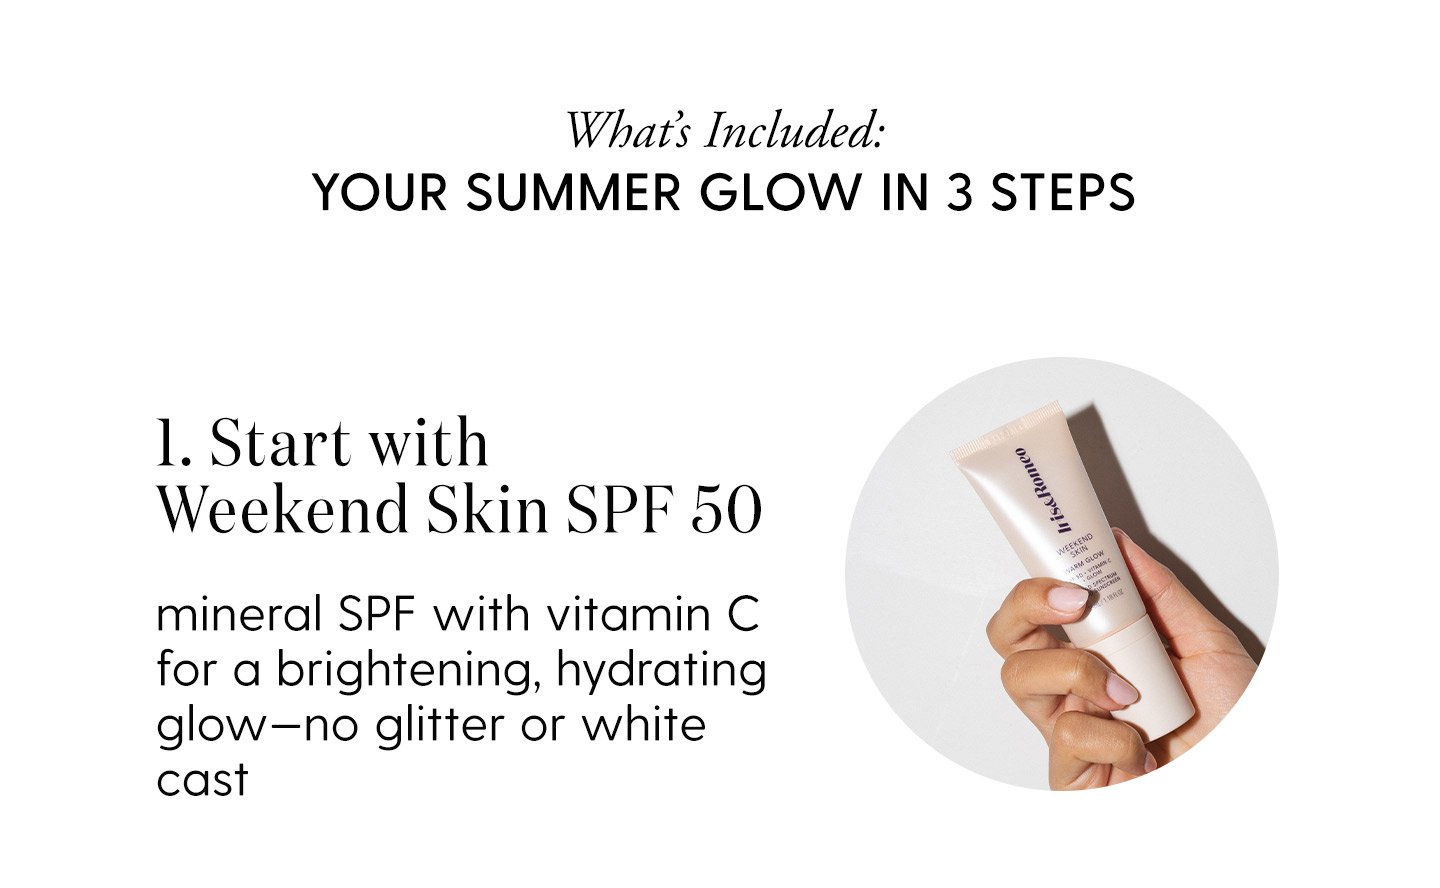 Your summer glow in 3 steps